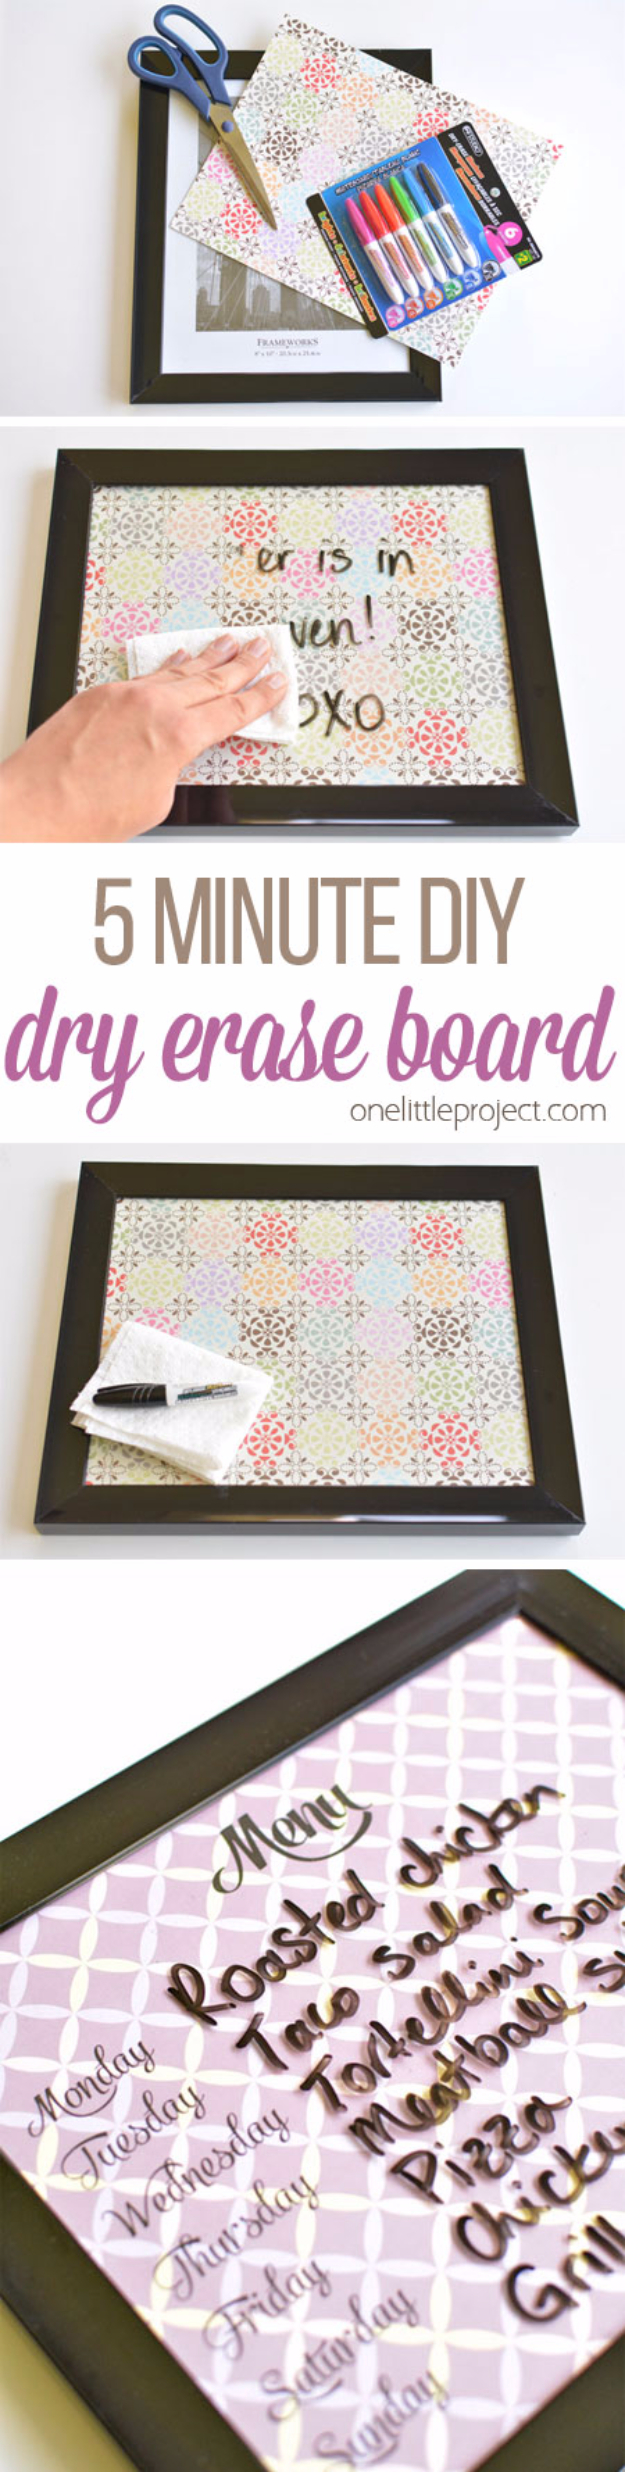 41 Easiest DIY Projects Ever - Easy DIY Whiteboards - Easy DIY Crafts and Projects - Simple Craft Ideas for Beginners, Cool Crafts To Make and Sell, Simple Home Decor, Fast DIY Gifts, Cheap and Quick Project Tutorials http://diyjoy.com/easy-diy-projects